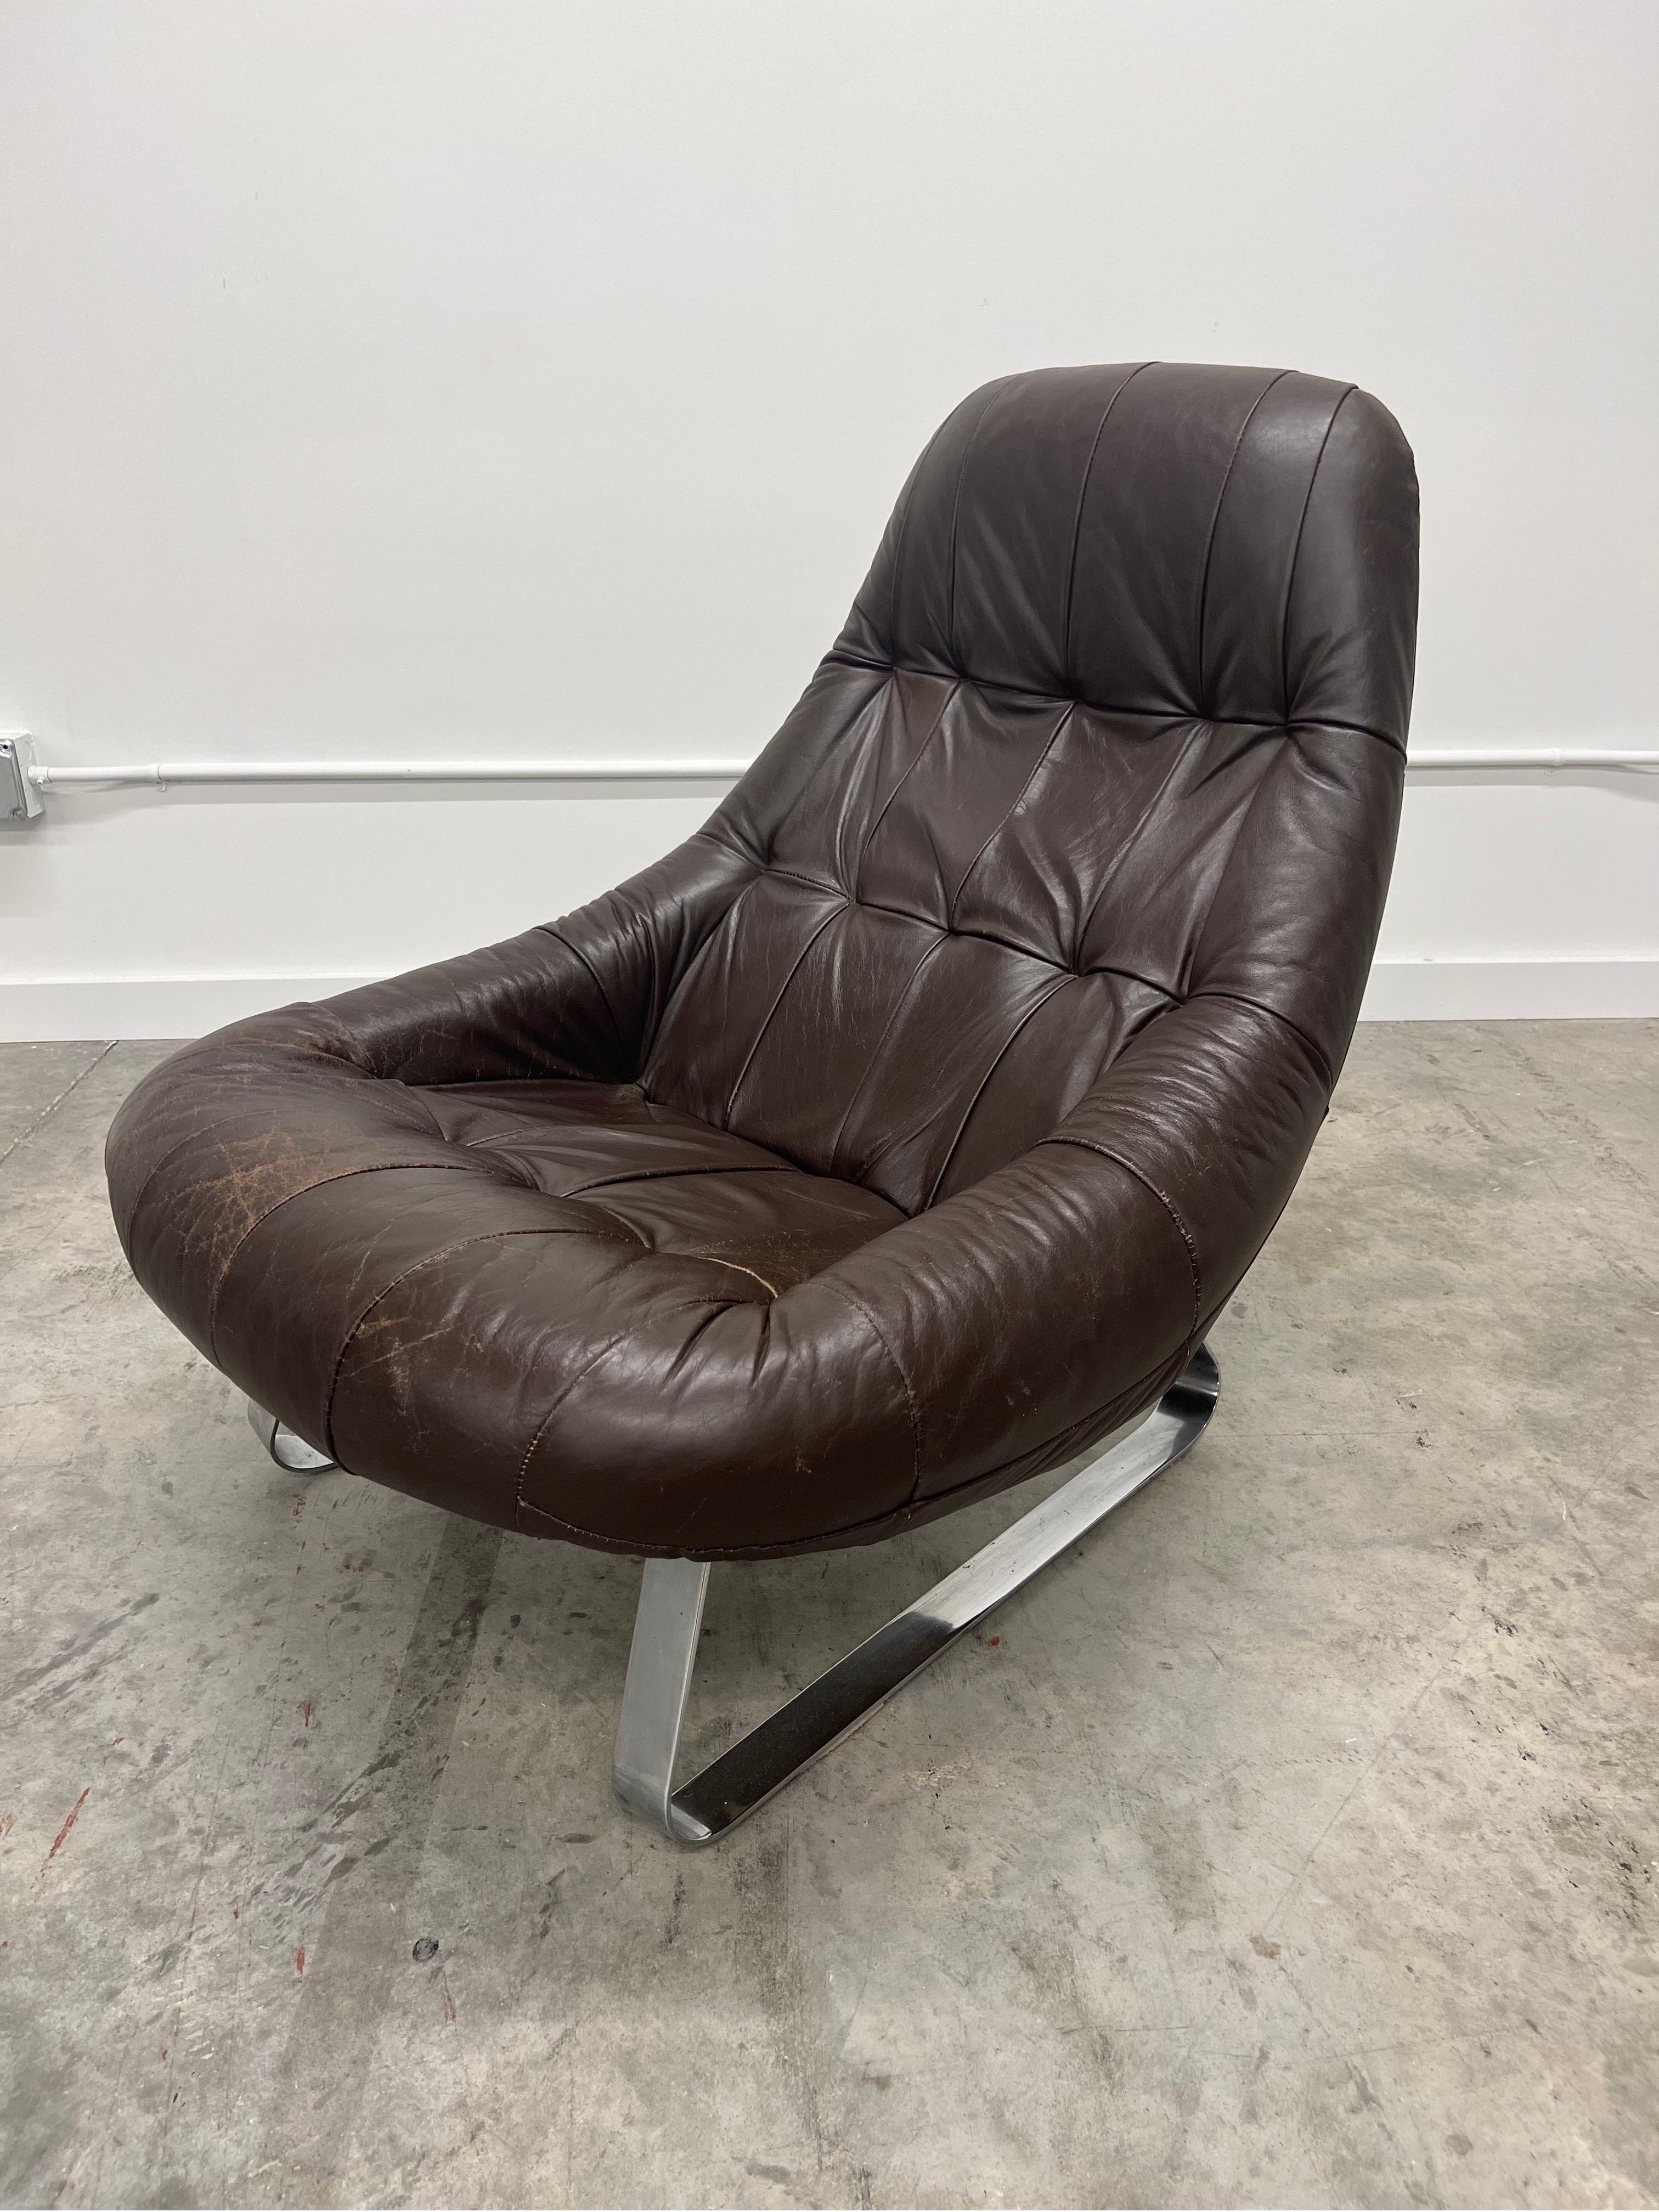 Possibly one of the most comfortable chairs or lounges I’ve ever experienced. Designed by Percival Lafer, 1970s with original leather. Love the mix of leather and chrome material and the low profile.